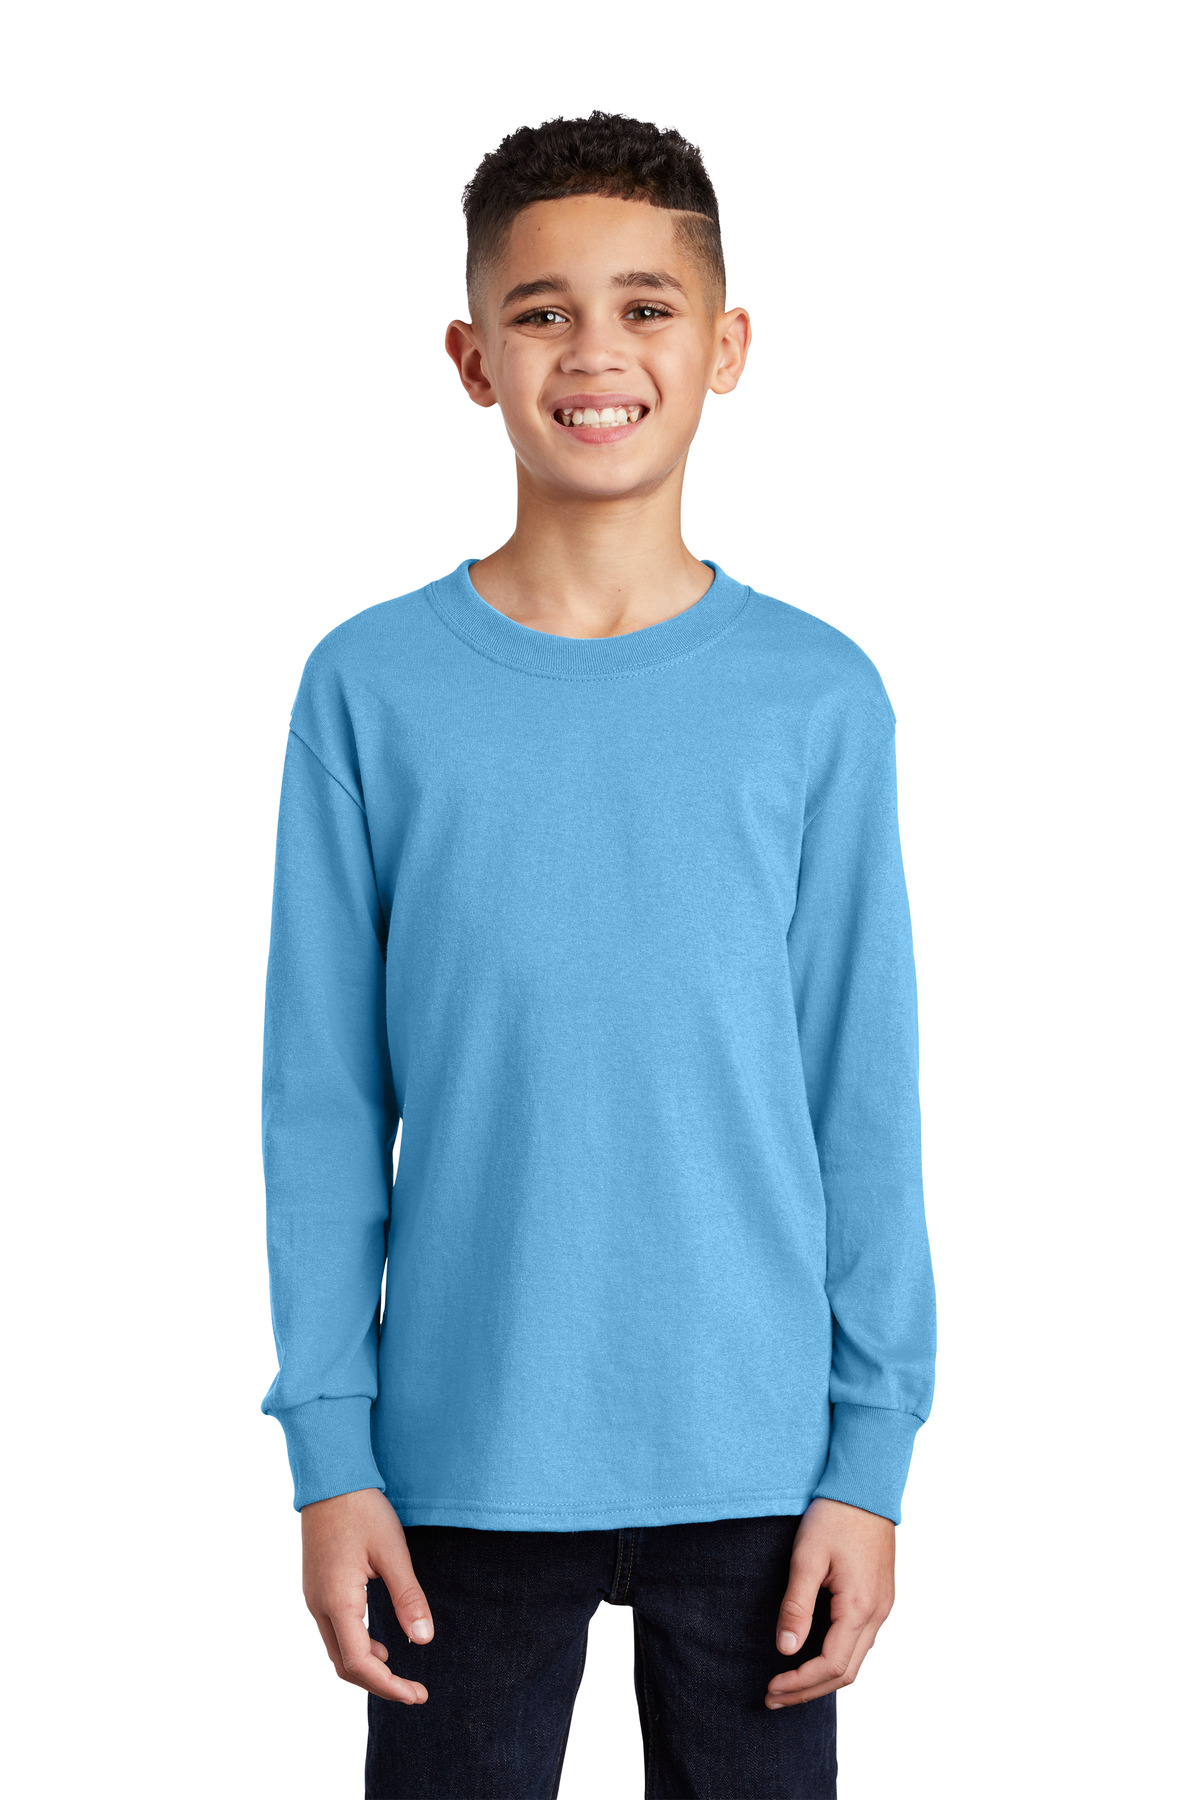 Port & Company Youth Long Sleeve Core Cotton T-Shirt - PC54YLS